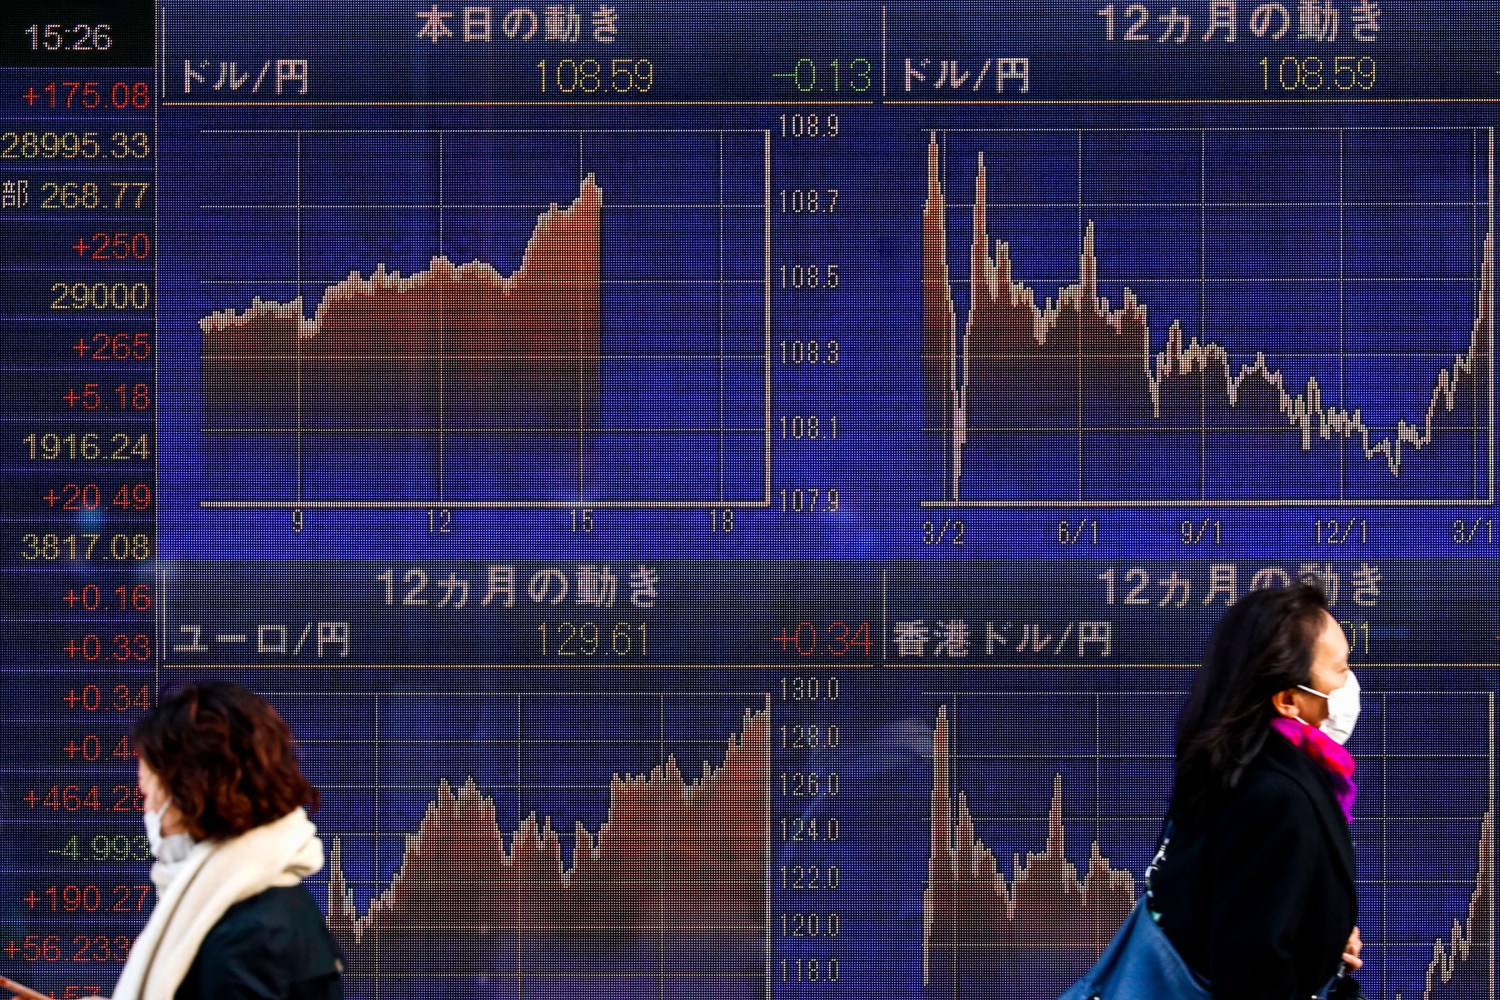 People wearing face masks walk past an electronic board showing currency exchange rates.